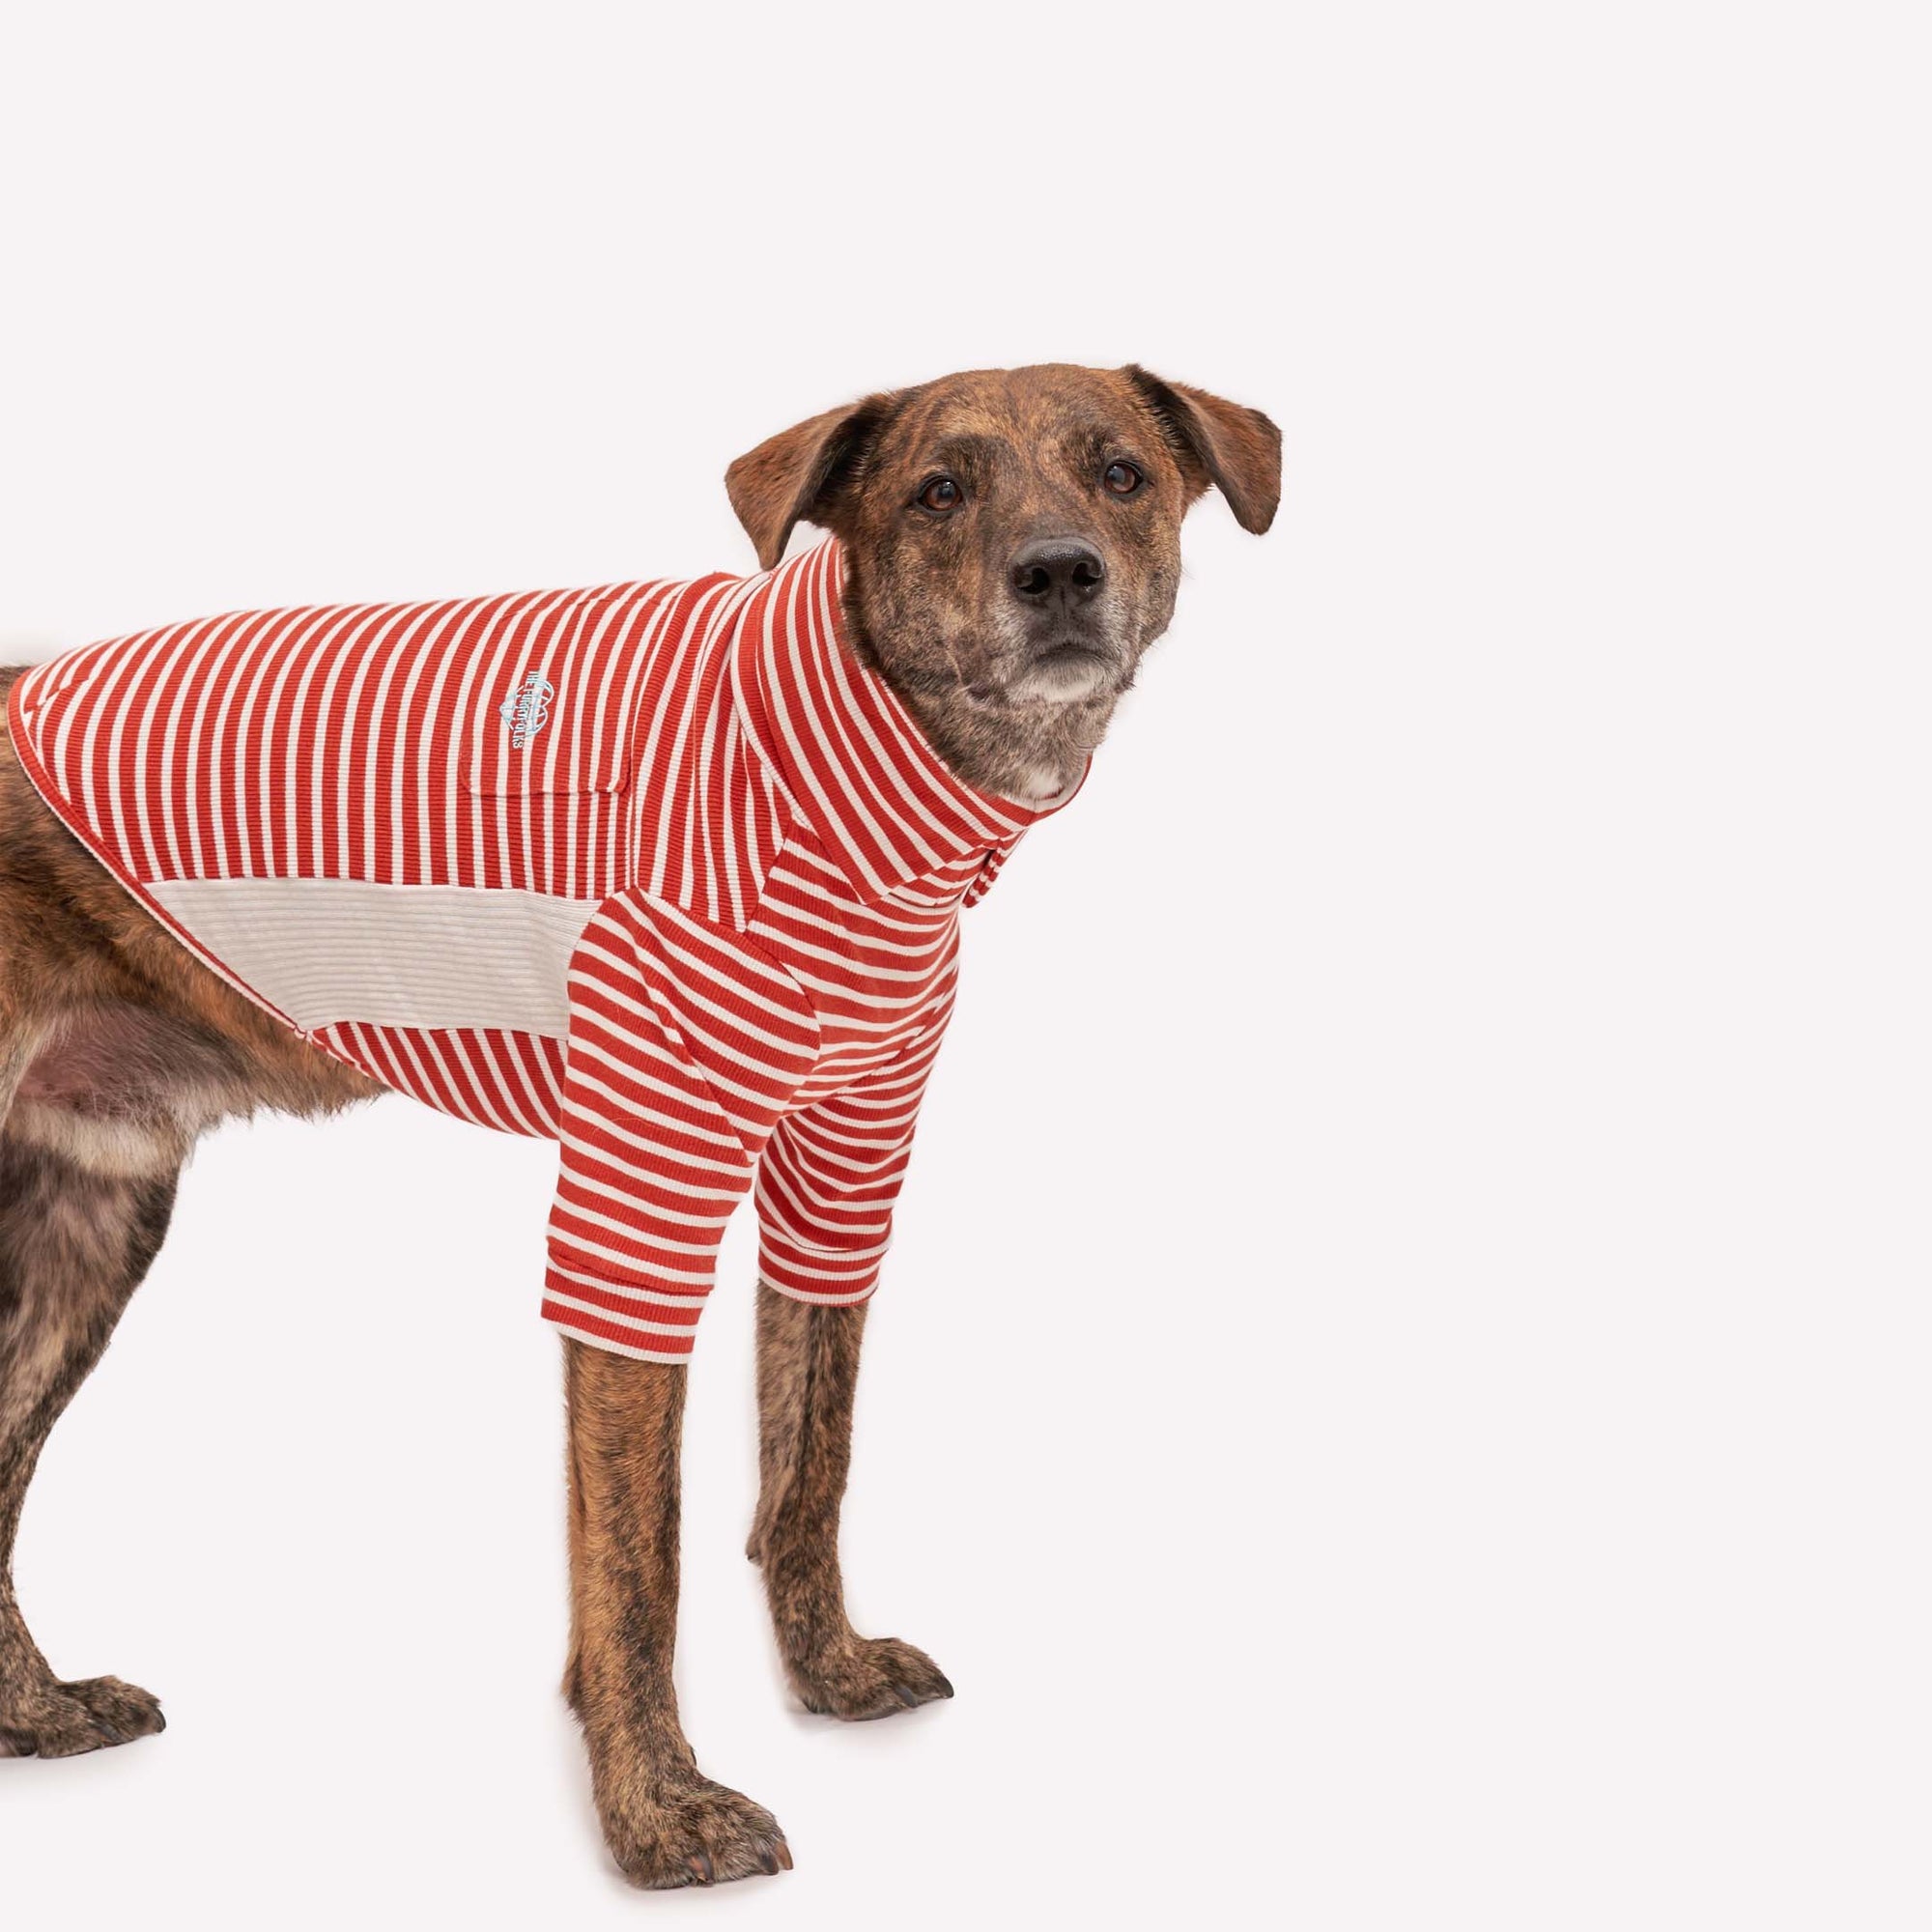 Brindle dog posing in a Rust & Ivory striped shirt with red heart detail, perfect for stylish pets.